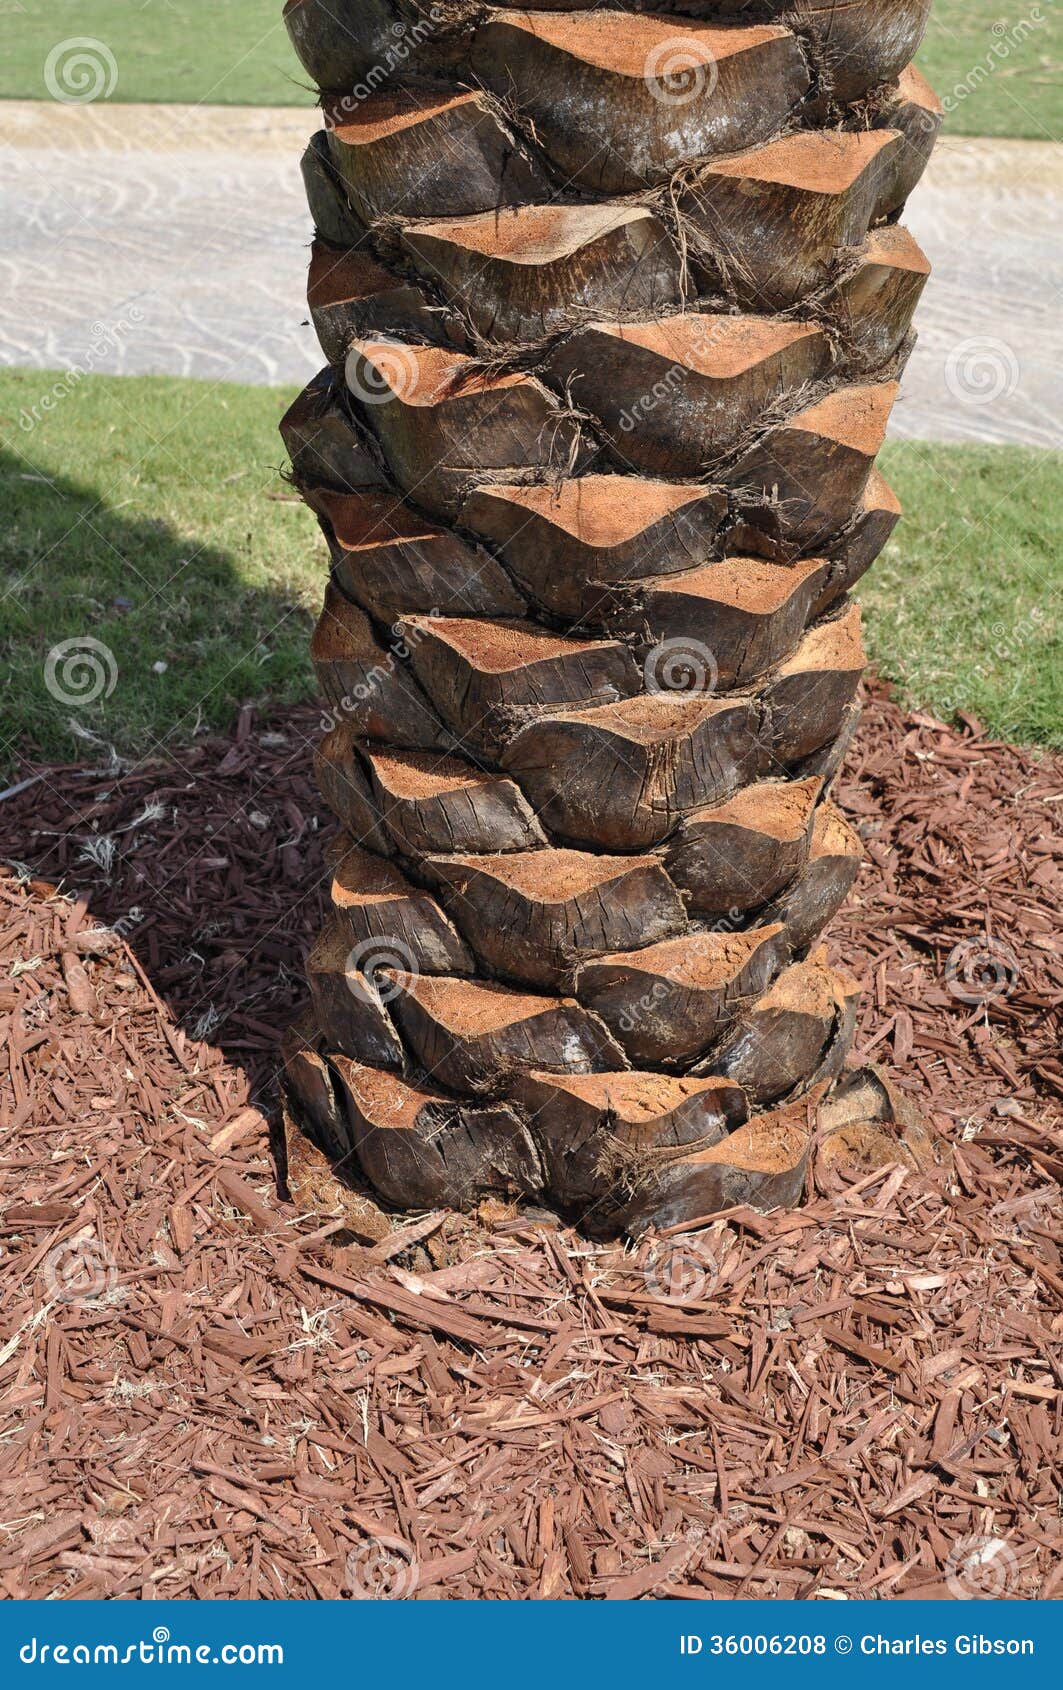 Palm tree trunk stock photo Image of flora branches 